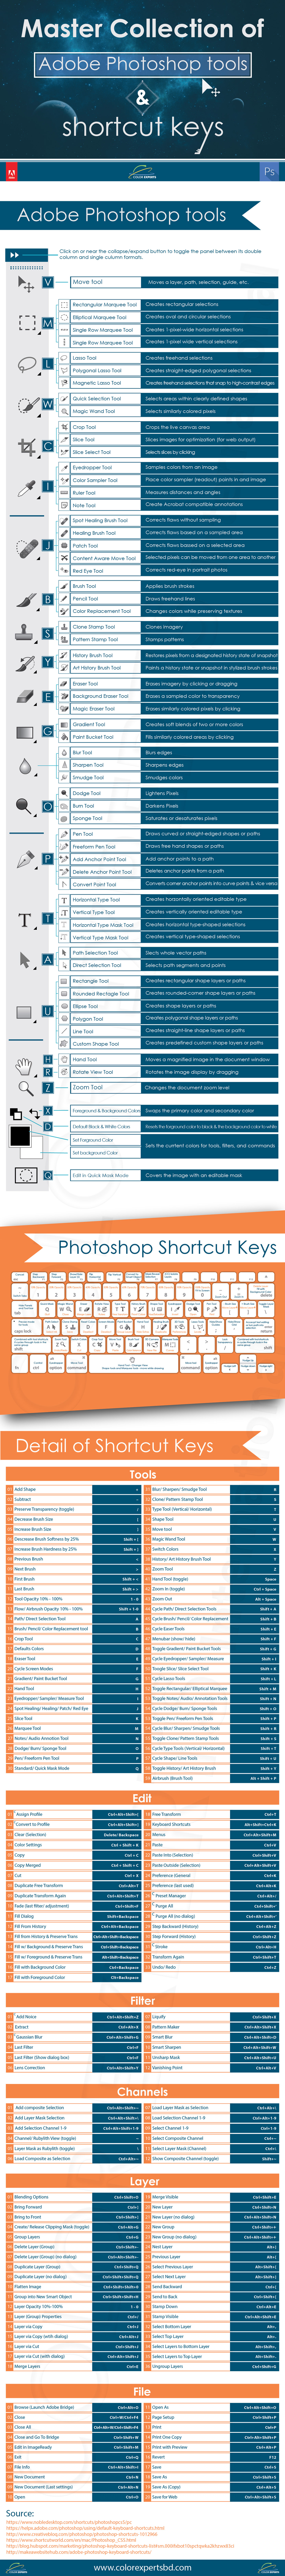 Master Collection of Adobe Photoshop tools & shortcut keys